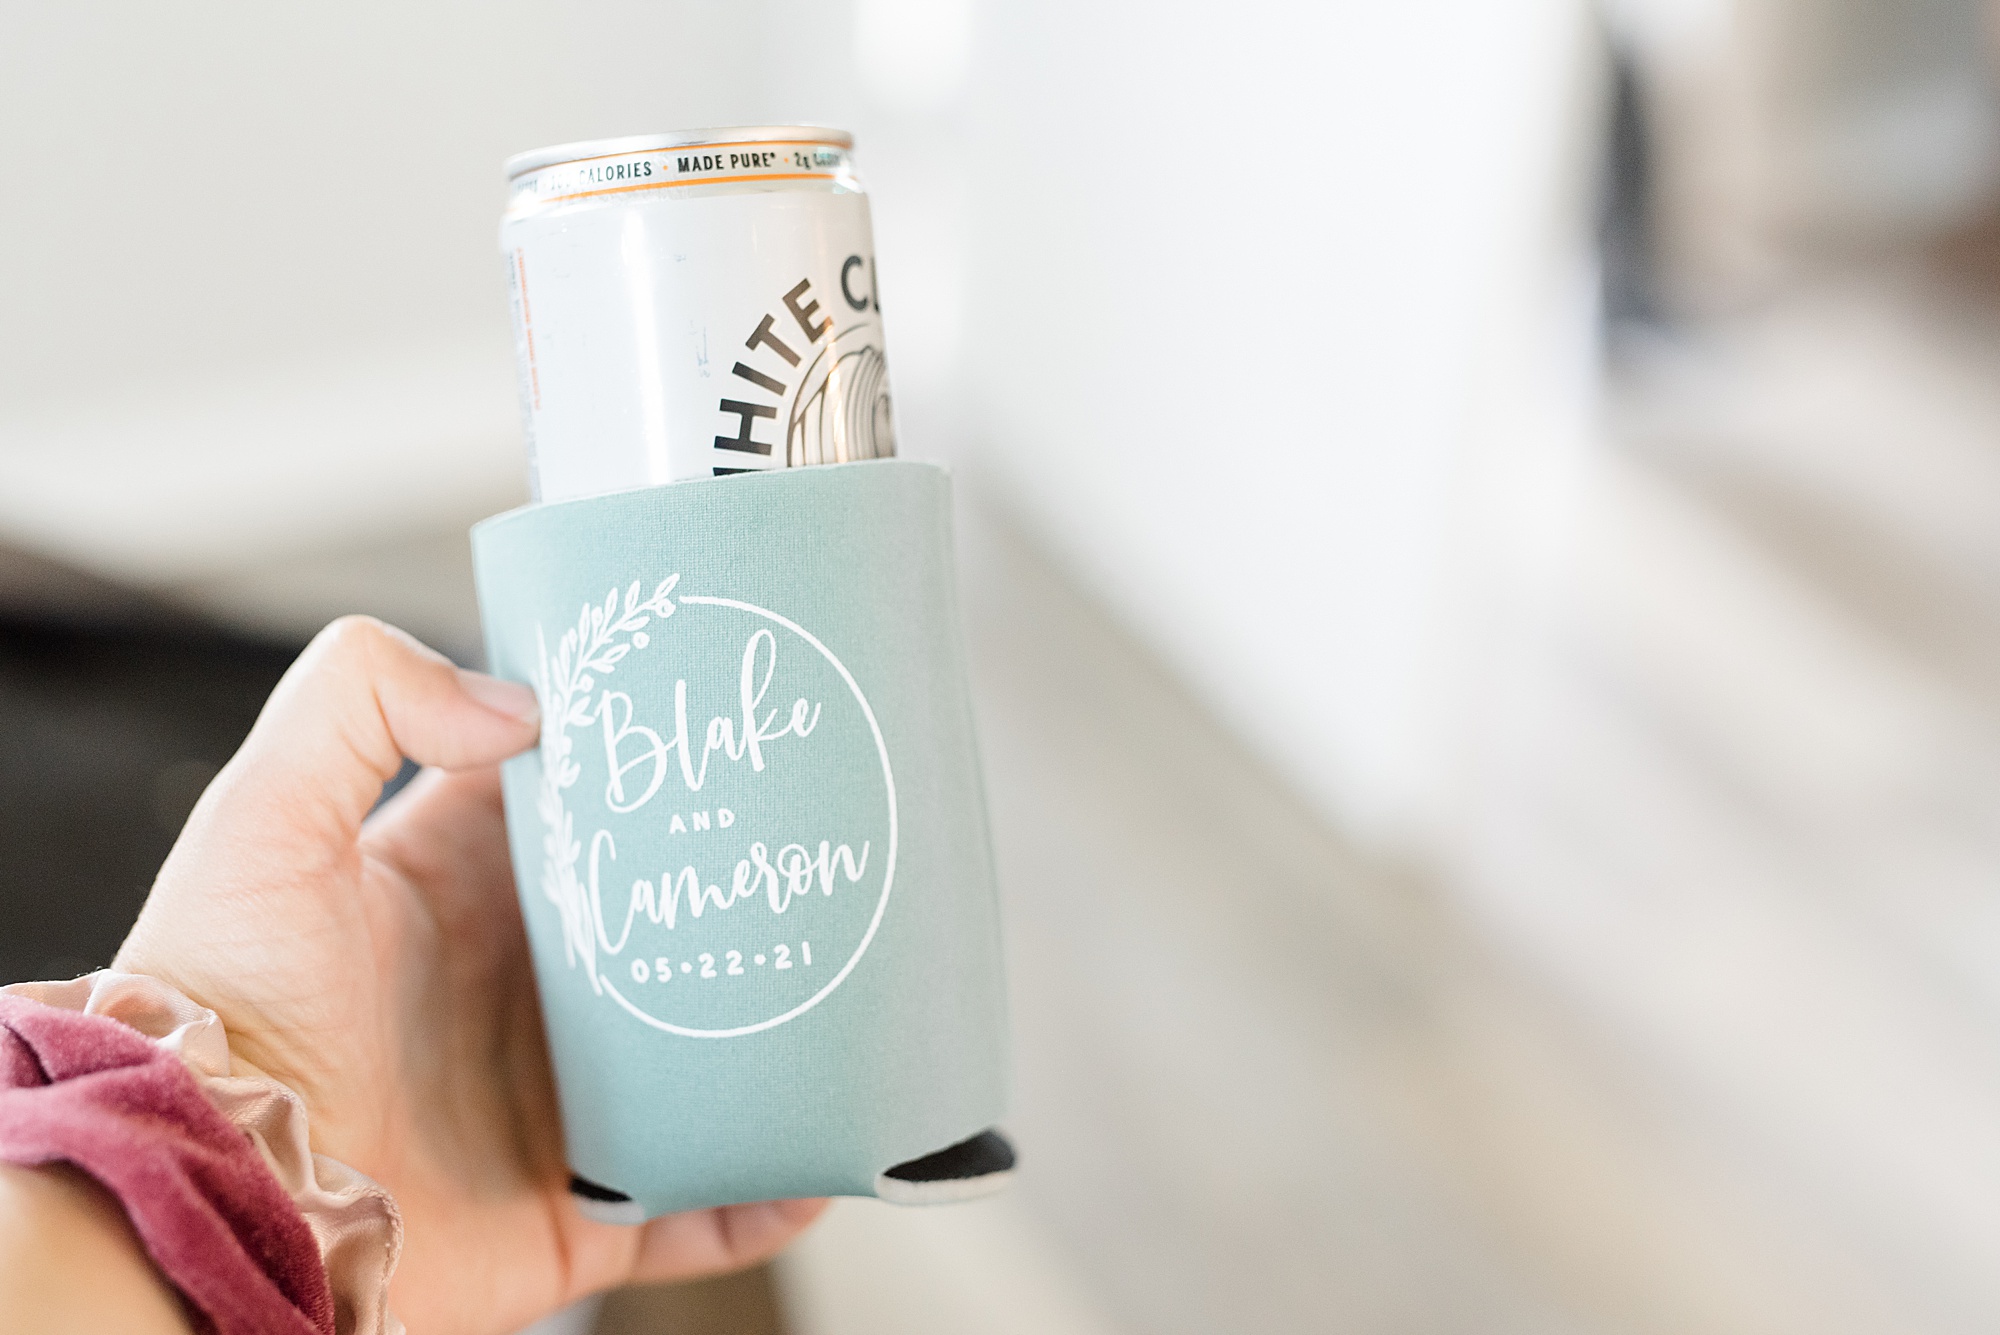 koozies for wedding reception favors